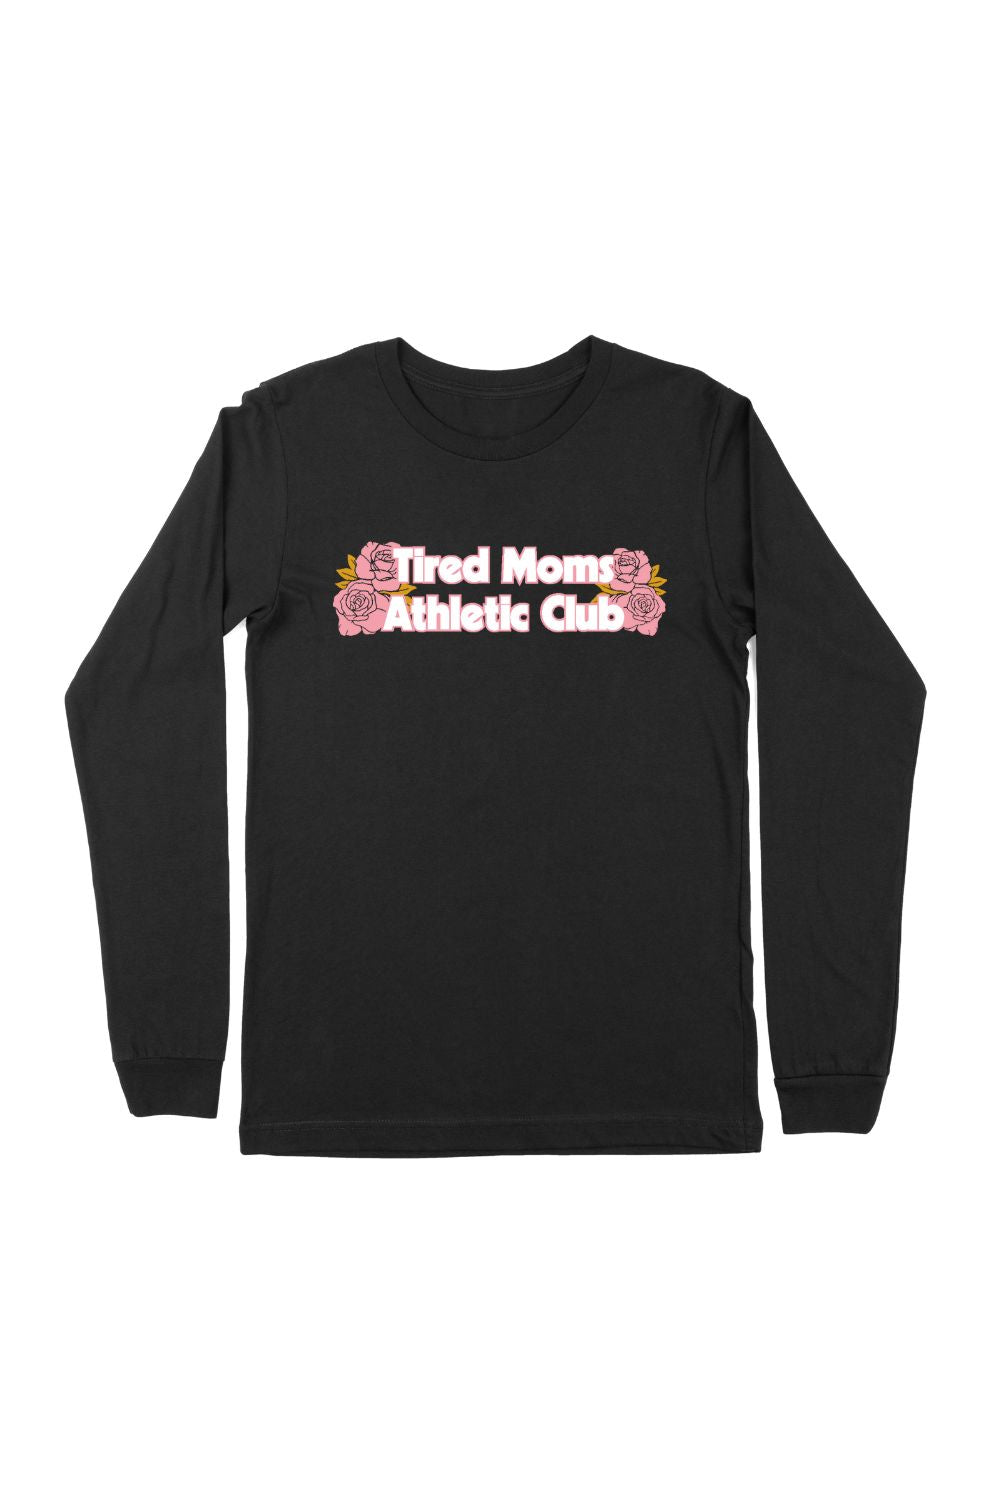 Tired Moms Athletic Club Long Sleeve